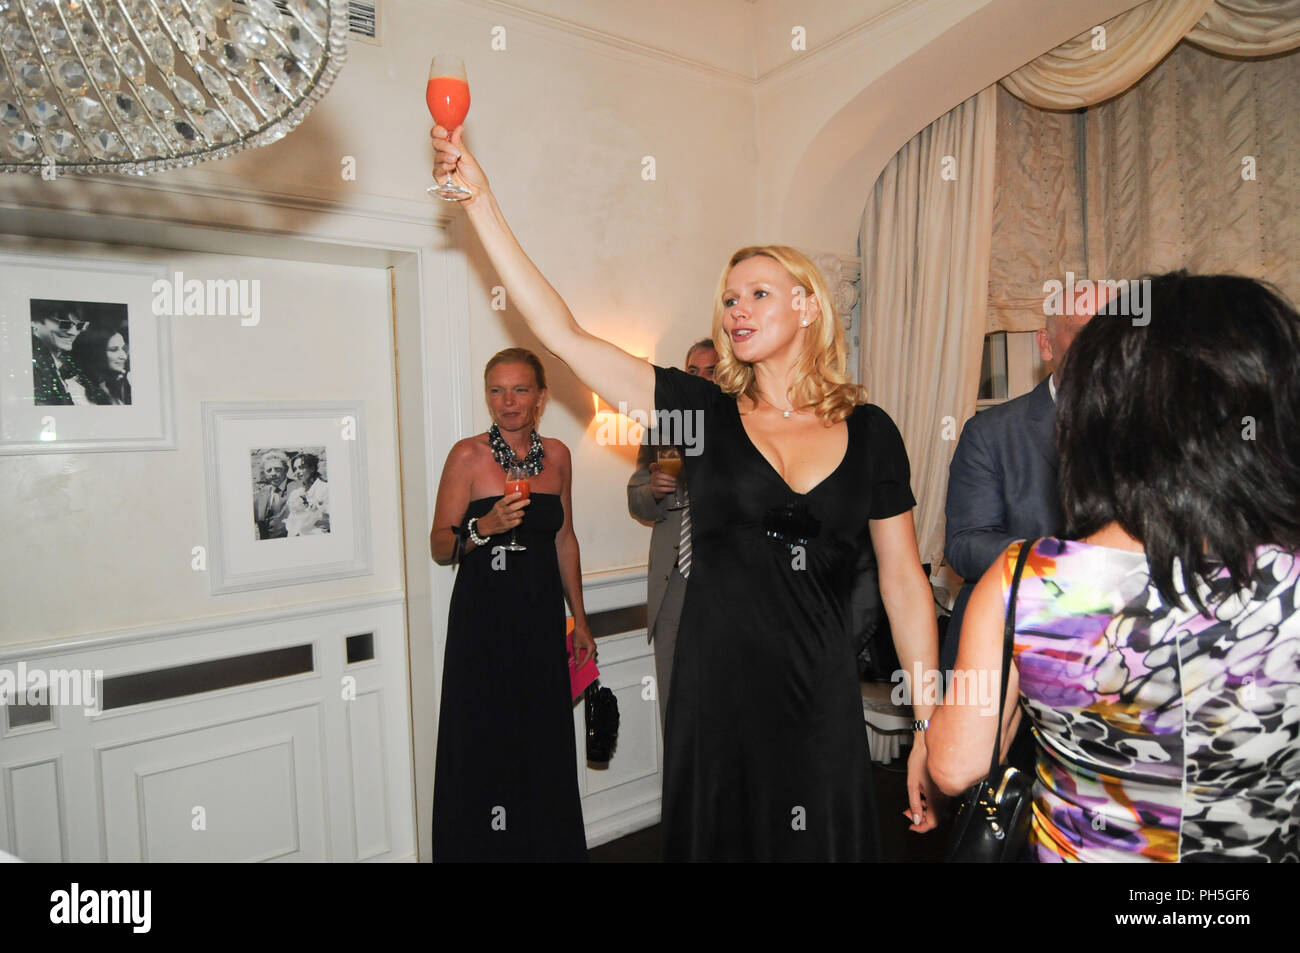 Actress Veronica Ferres brings out a toast at a Filmfest München reception Stock Photo